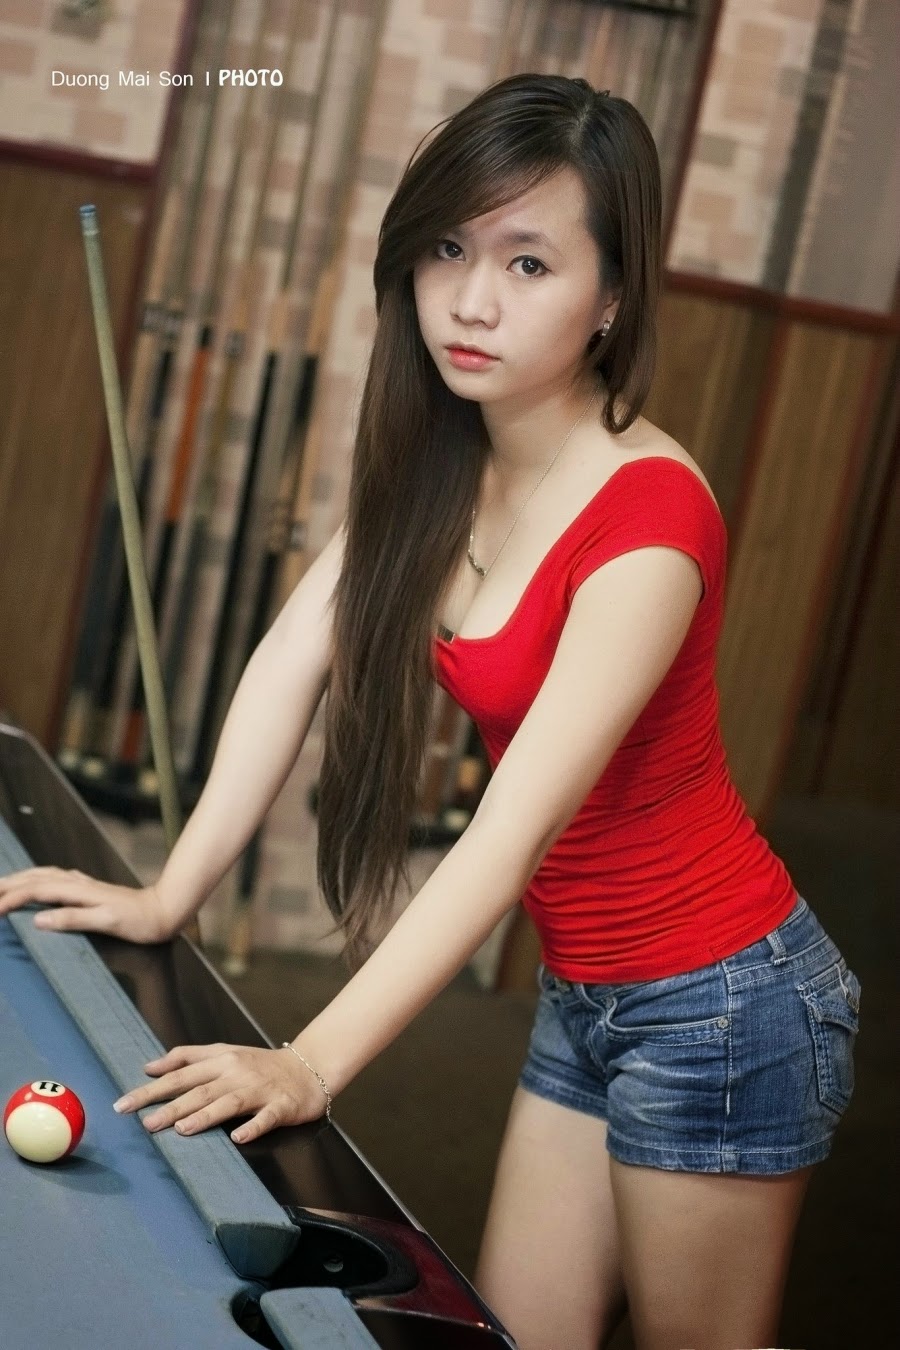 The Images Of A Vietnamese Sexy Girl To Play Billiards The Most Beautiful Women In The World 102580 Hot Sex Picture picture